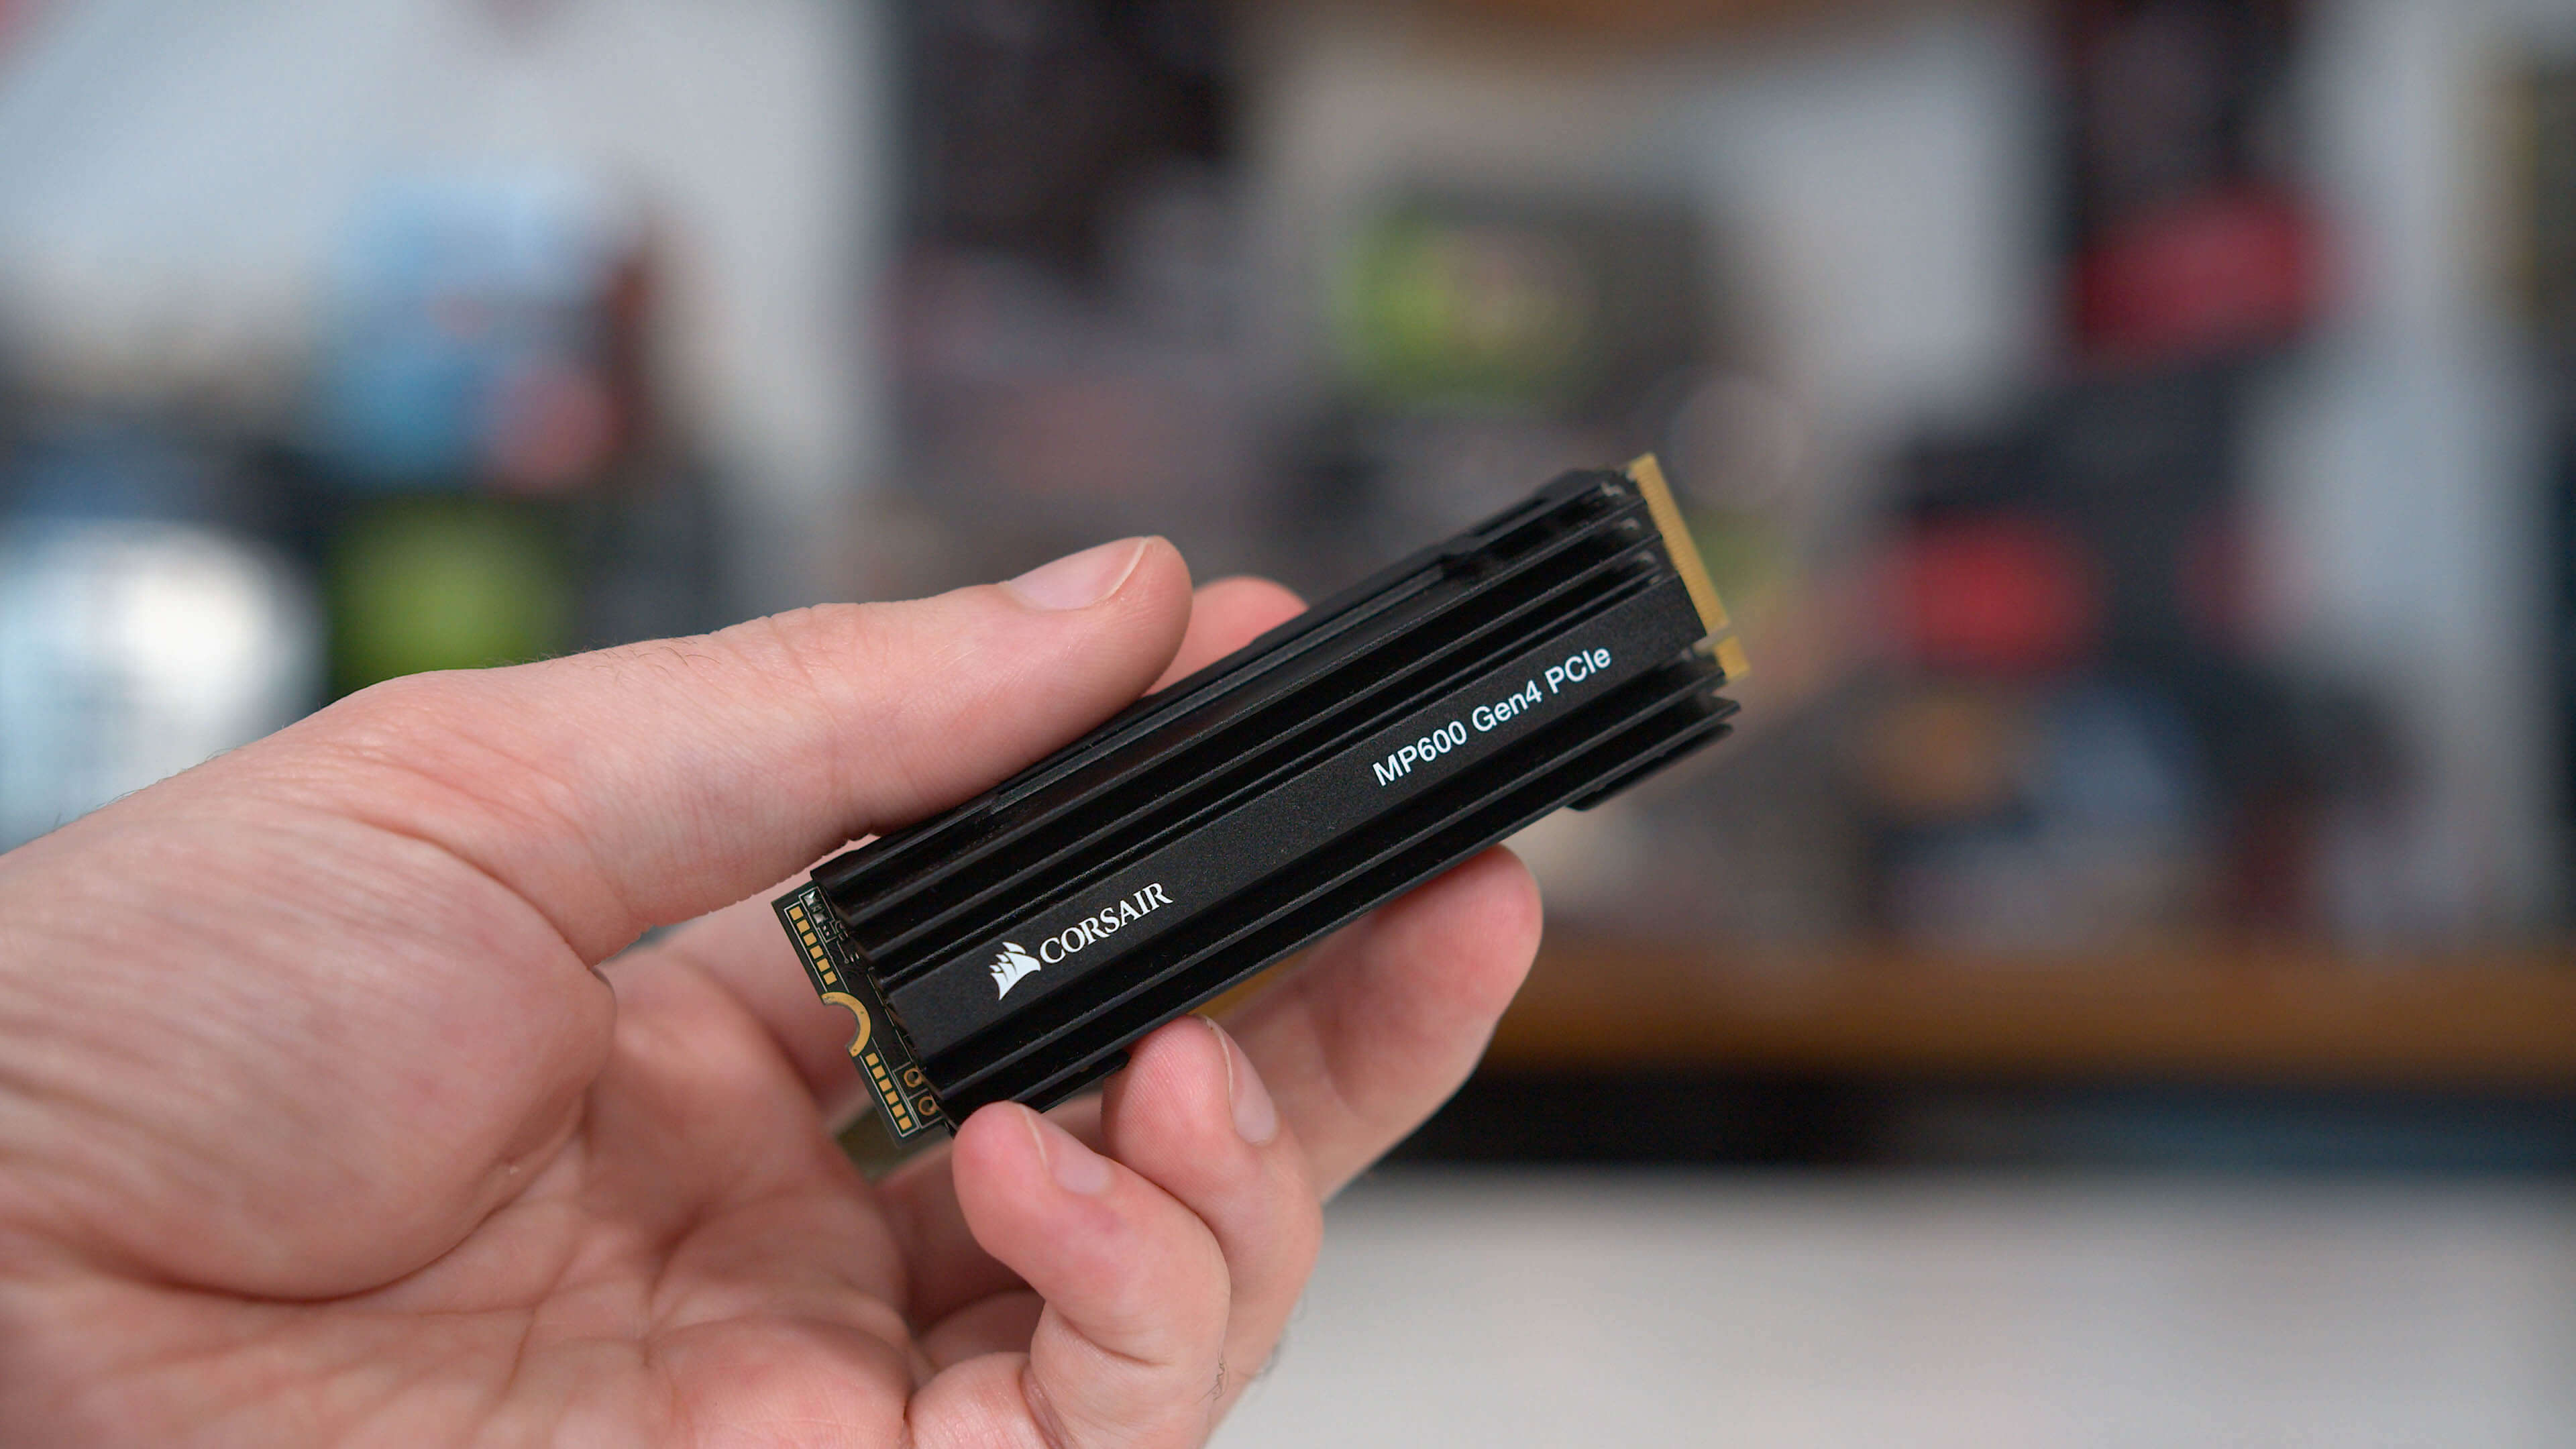 Corsair teases their first PCIe 5.0 SSD, capable of 10,000 MB/s sequential speeds